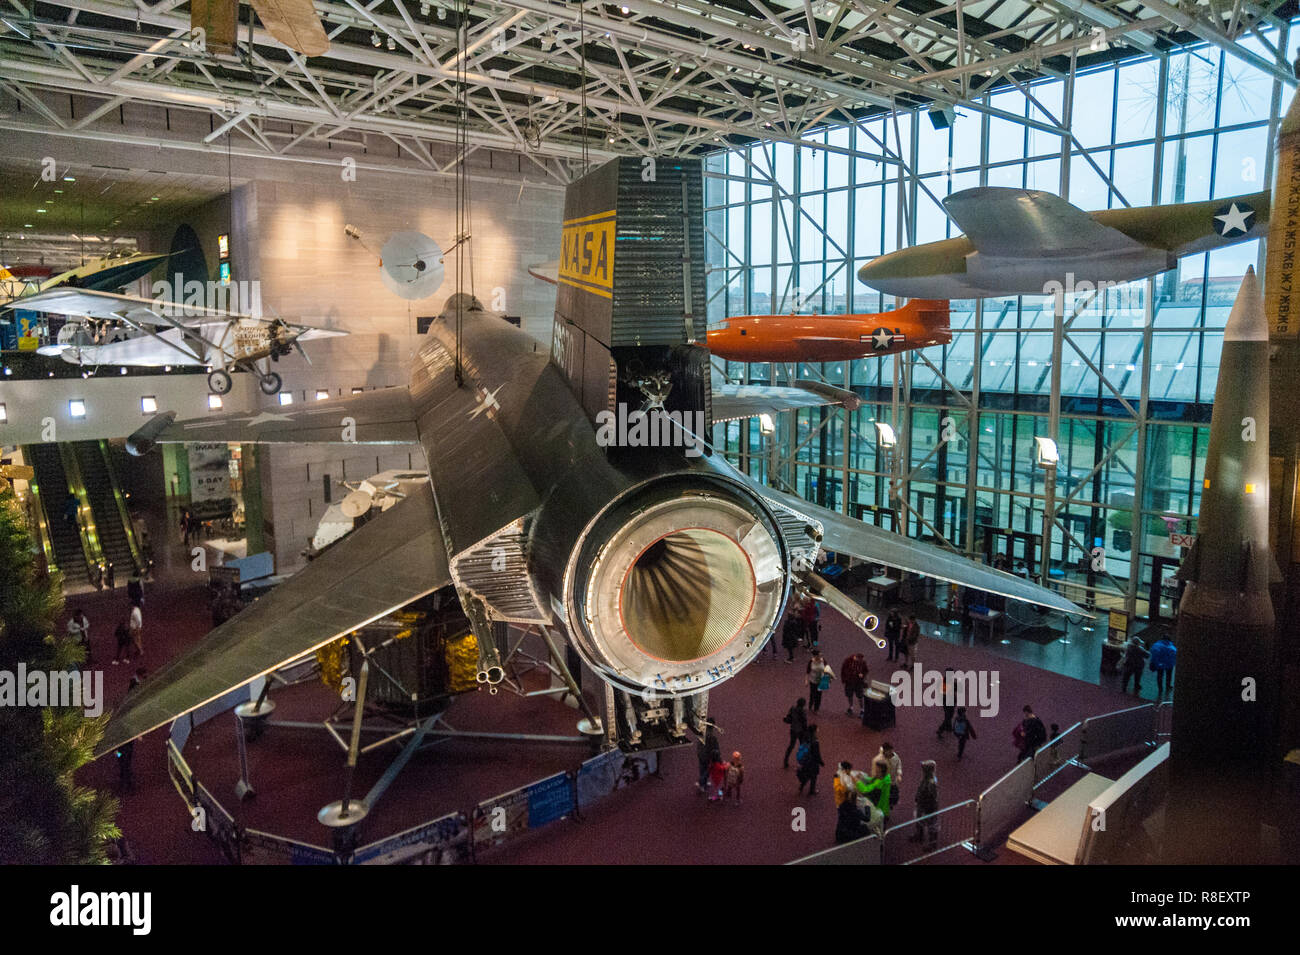 Washington DC, December 23, 2015. The Experimental Rocket plane X-15 on display at the Smithsonian Air and Space museum. Stock Photo